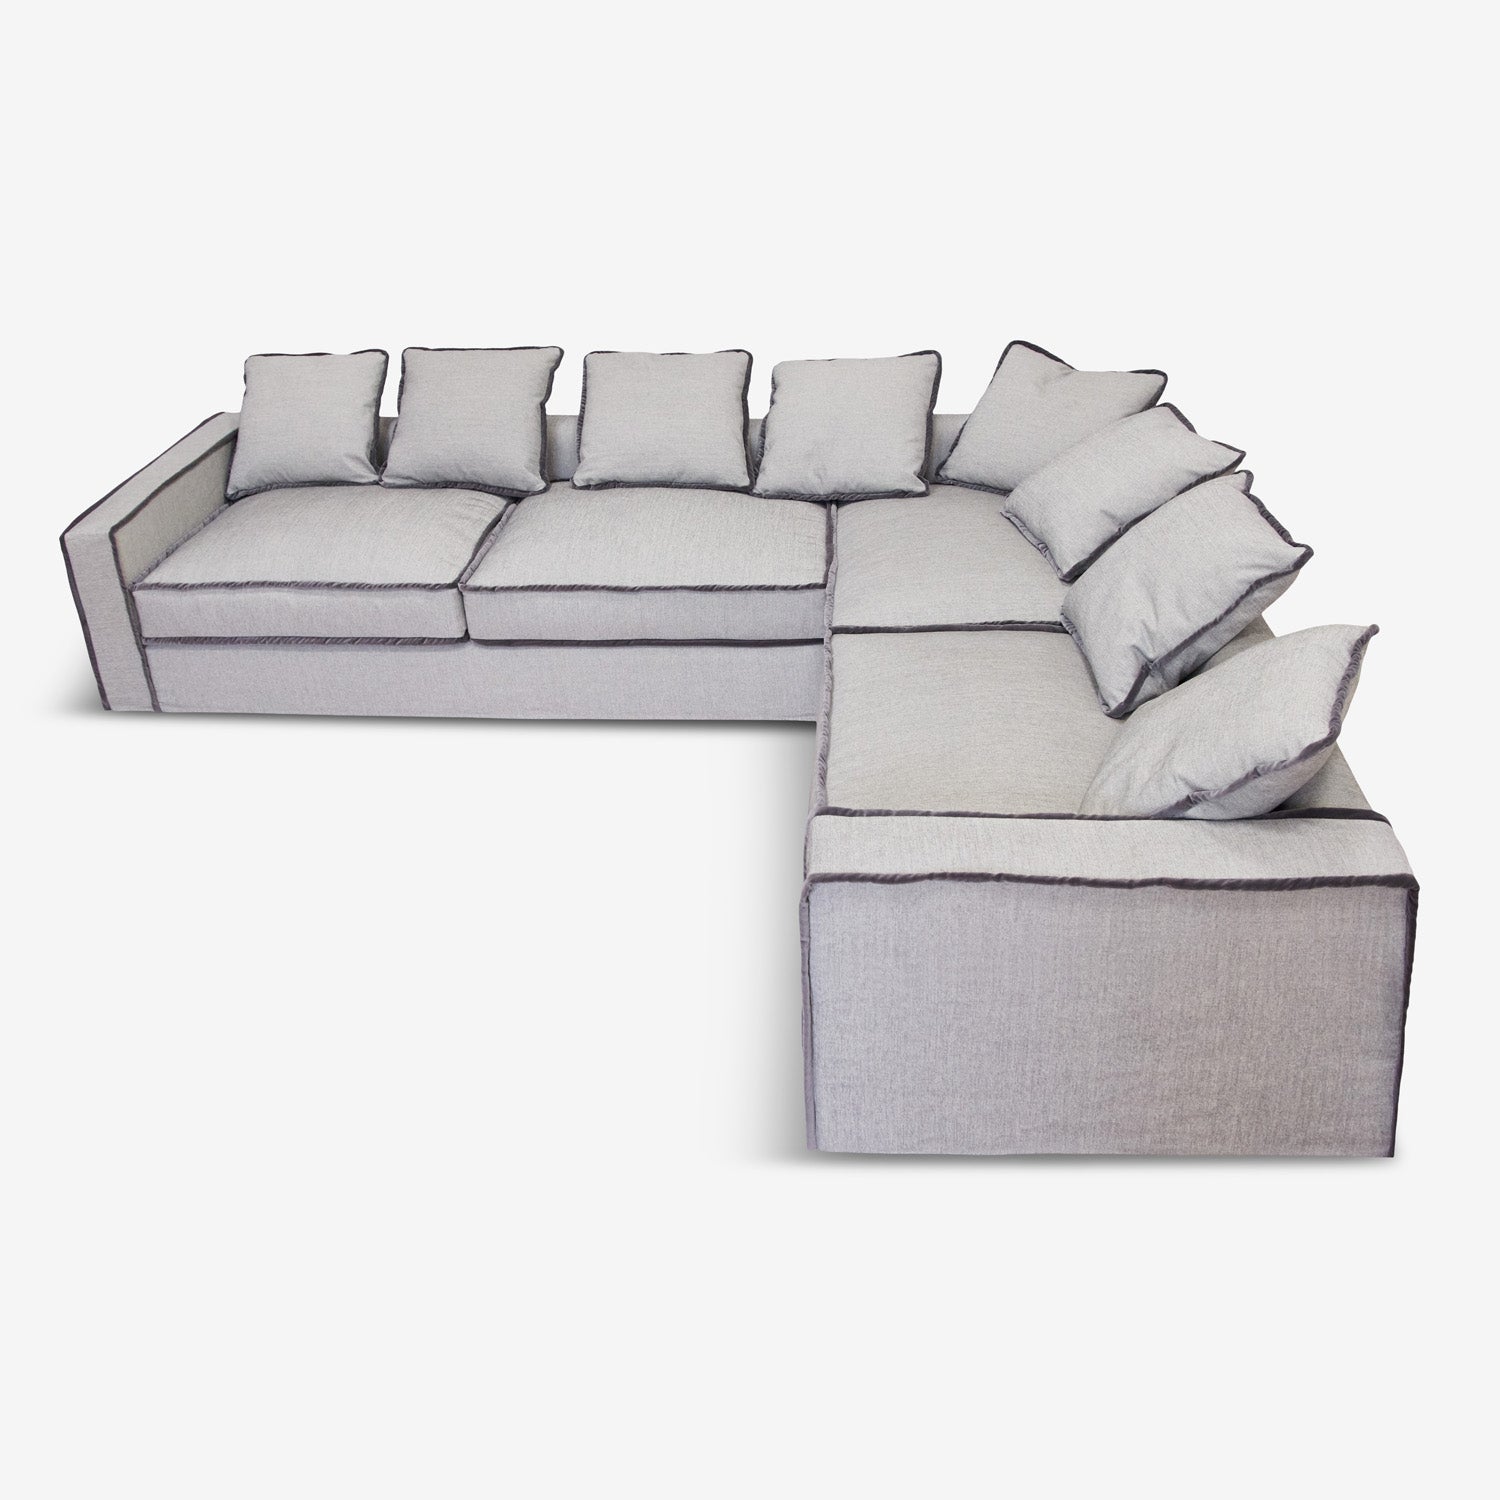 Lounge in Comfort and Style